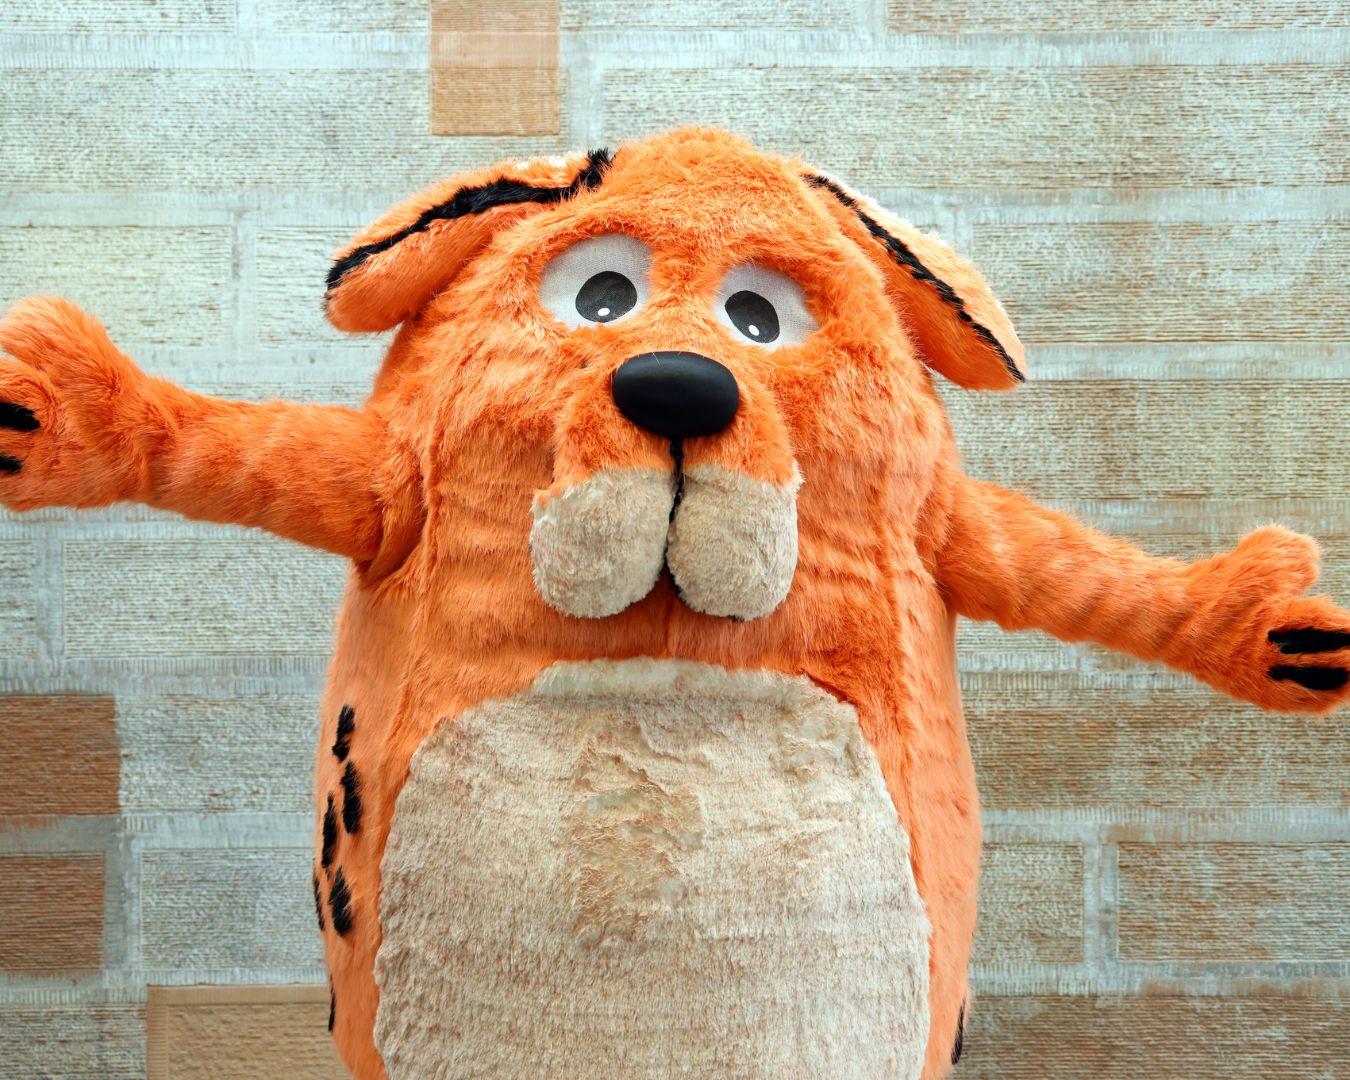 Children's Book Festival mascot Big Dog, predominantly orange with a white stomach and large floppy ears.